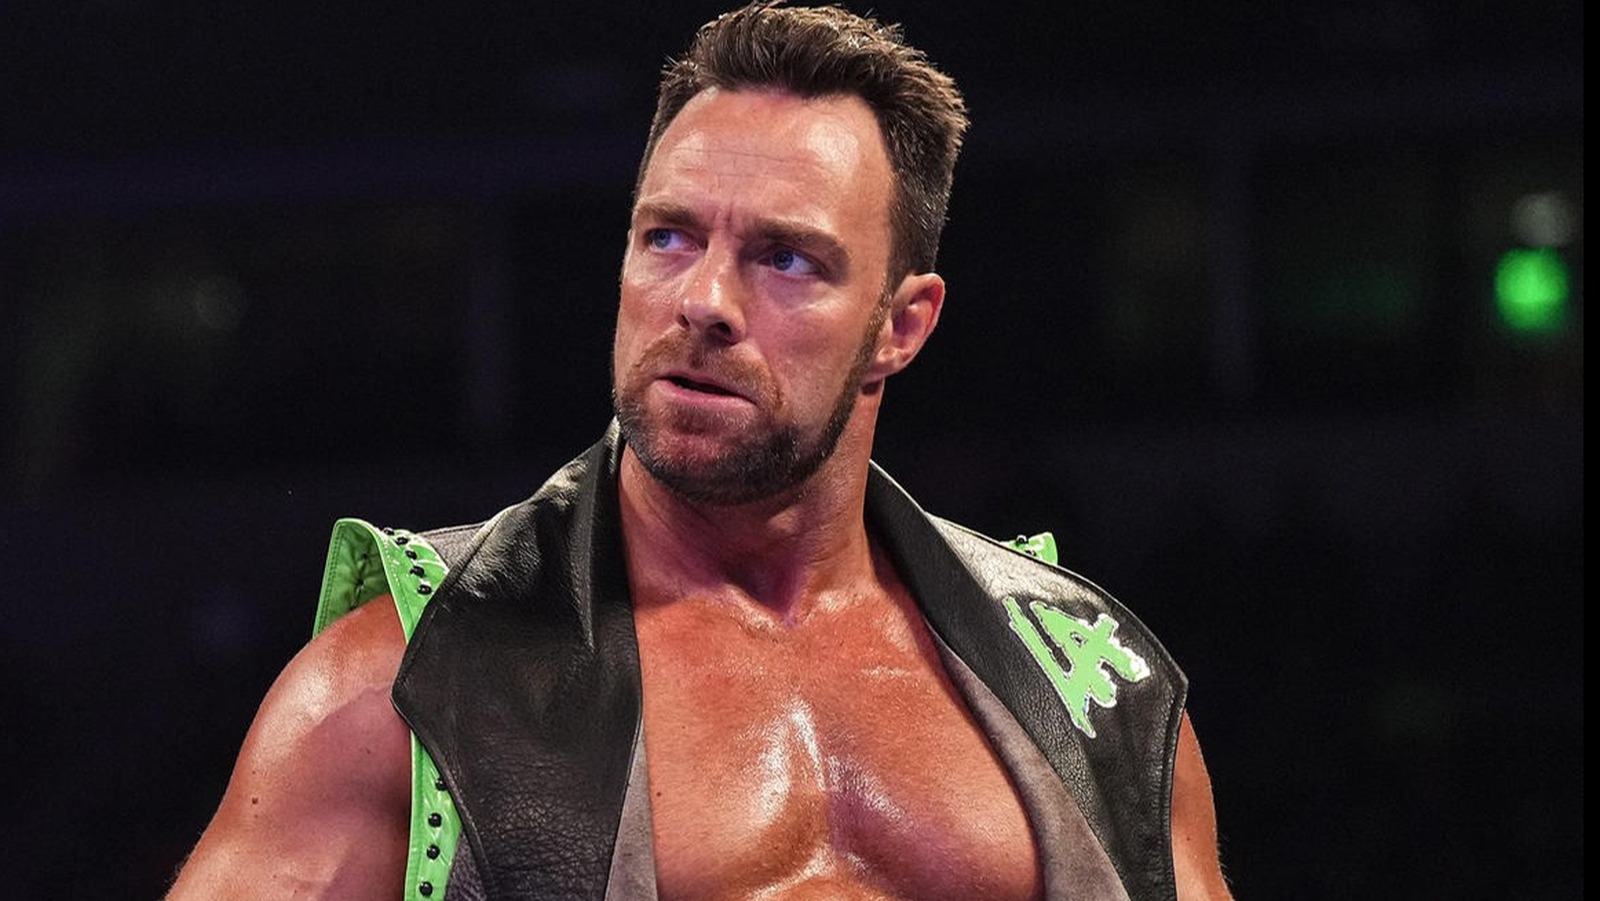 Mike Chioda Says LA Knight Is Getting Over Without WWE Pushing Him